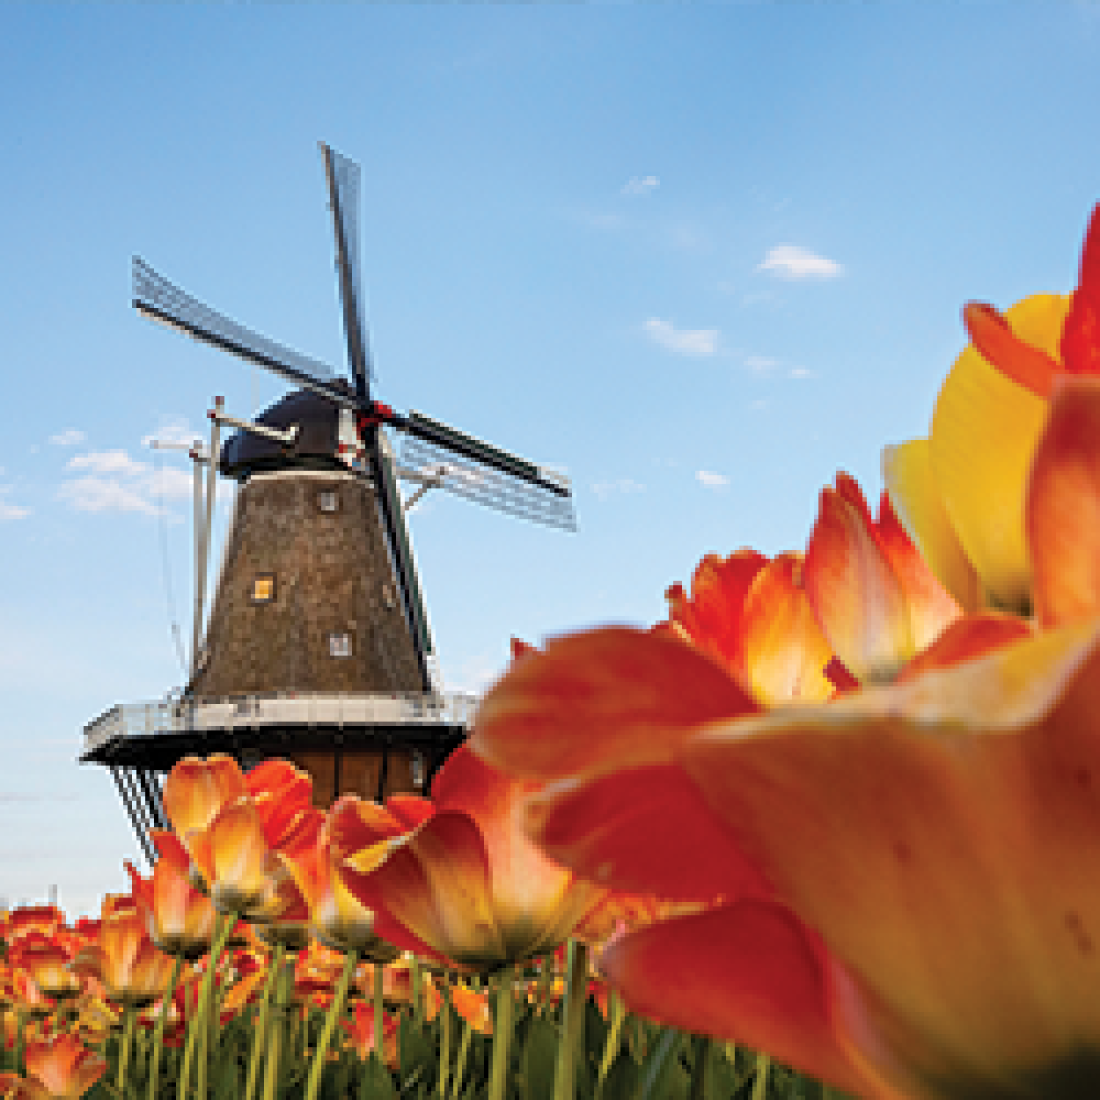 Picturesque view of orange and red tulips with a windmill in the background